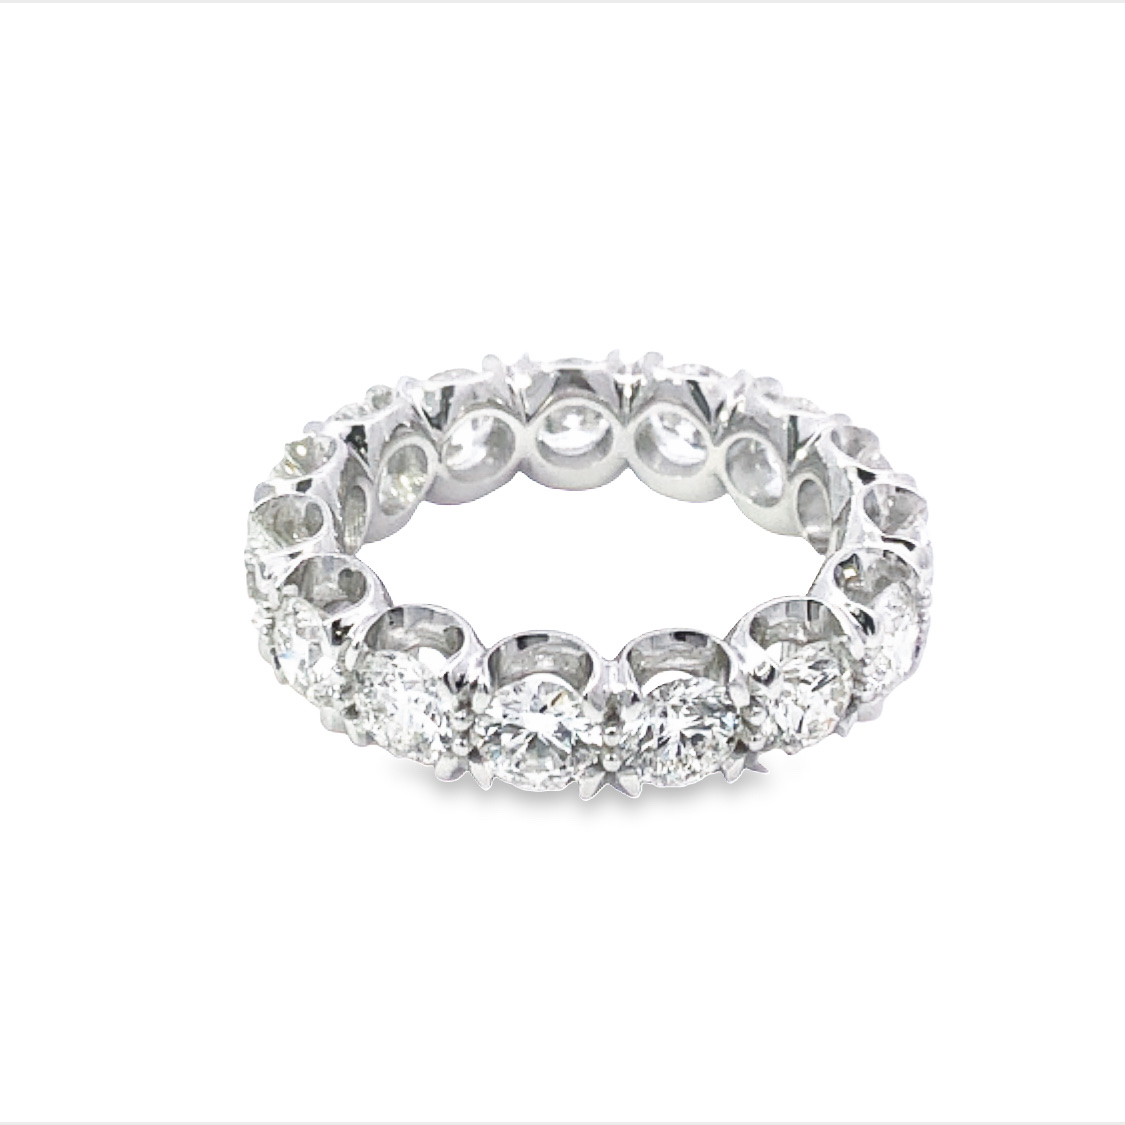 14K White Gold Eternity Band with 15 Round Diamonds 3.61 Tcw G-H SI